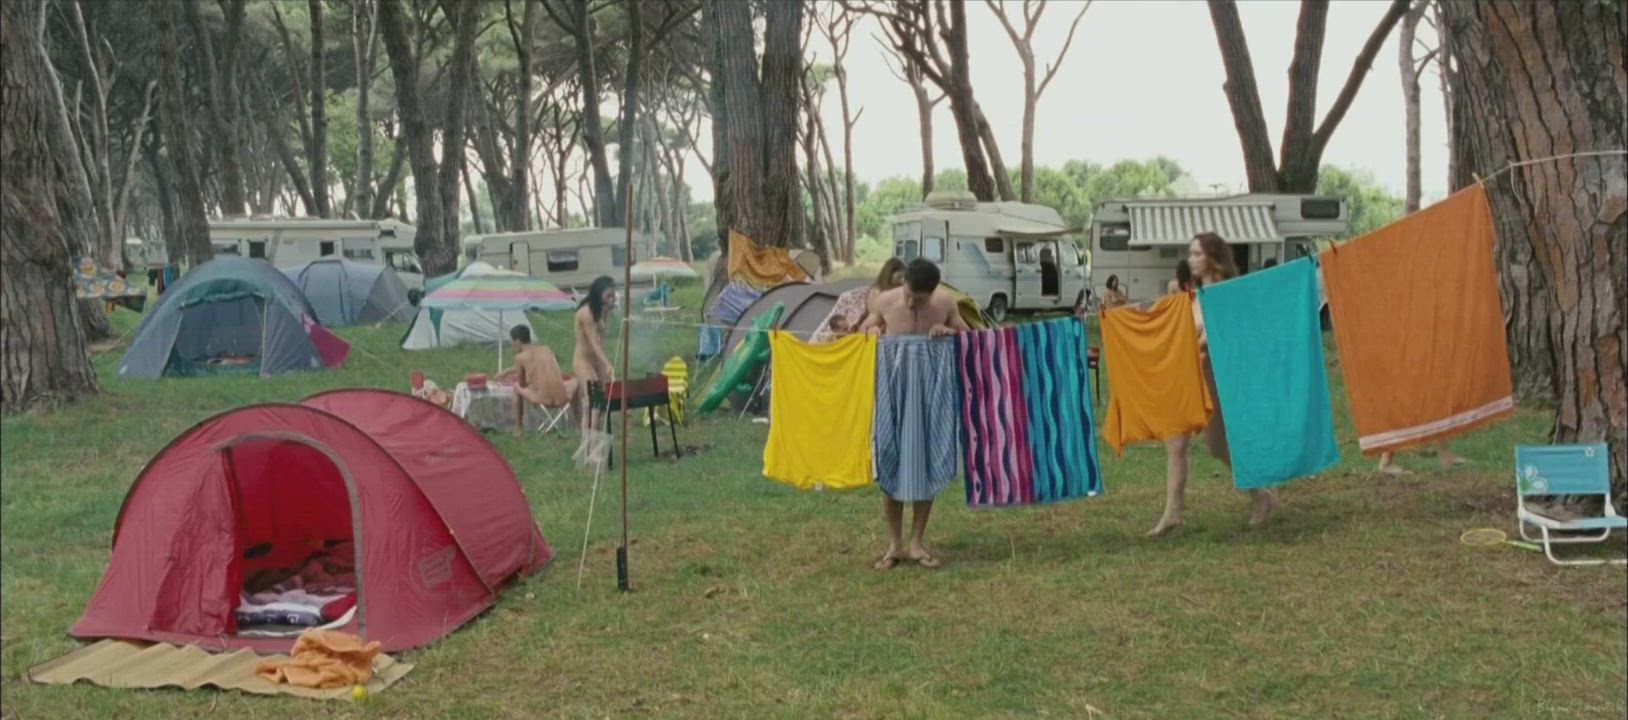 Hanging clothes and towels to dry (Sarah Felberbaum + others - Maschi Contro Femmine